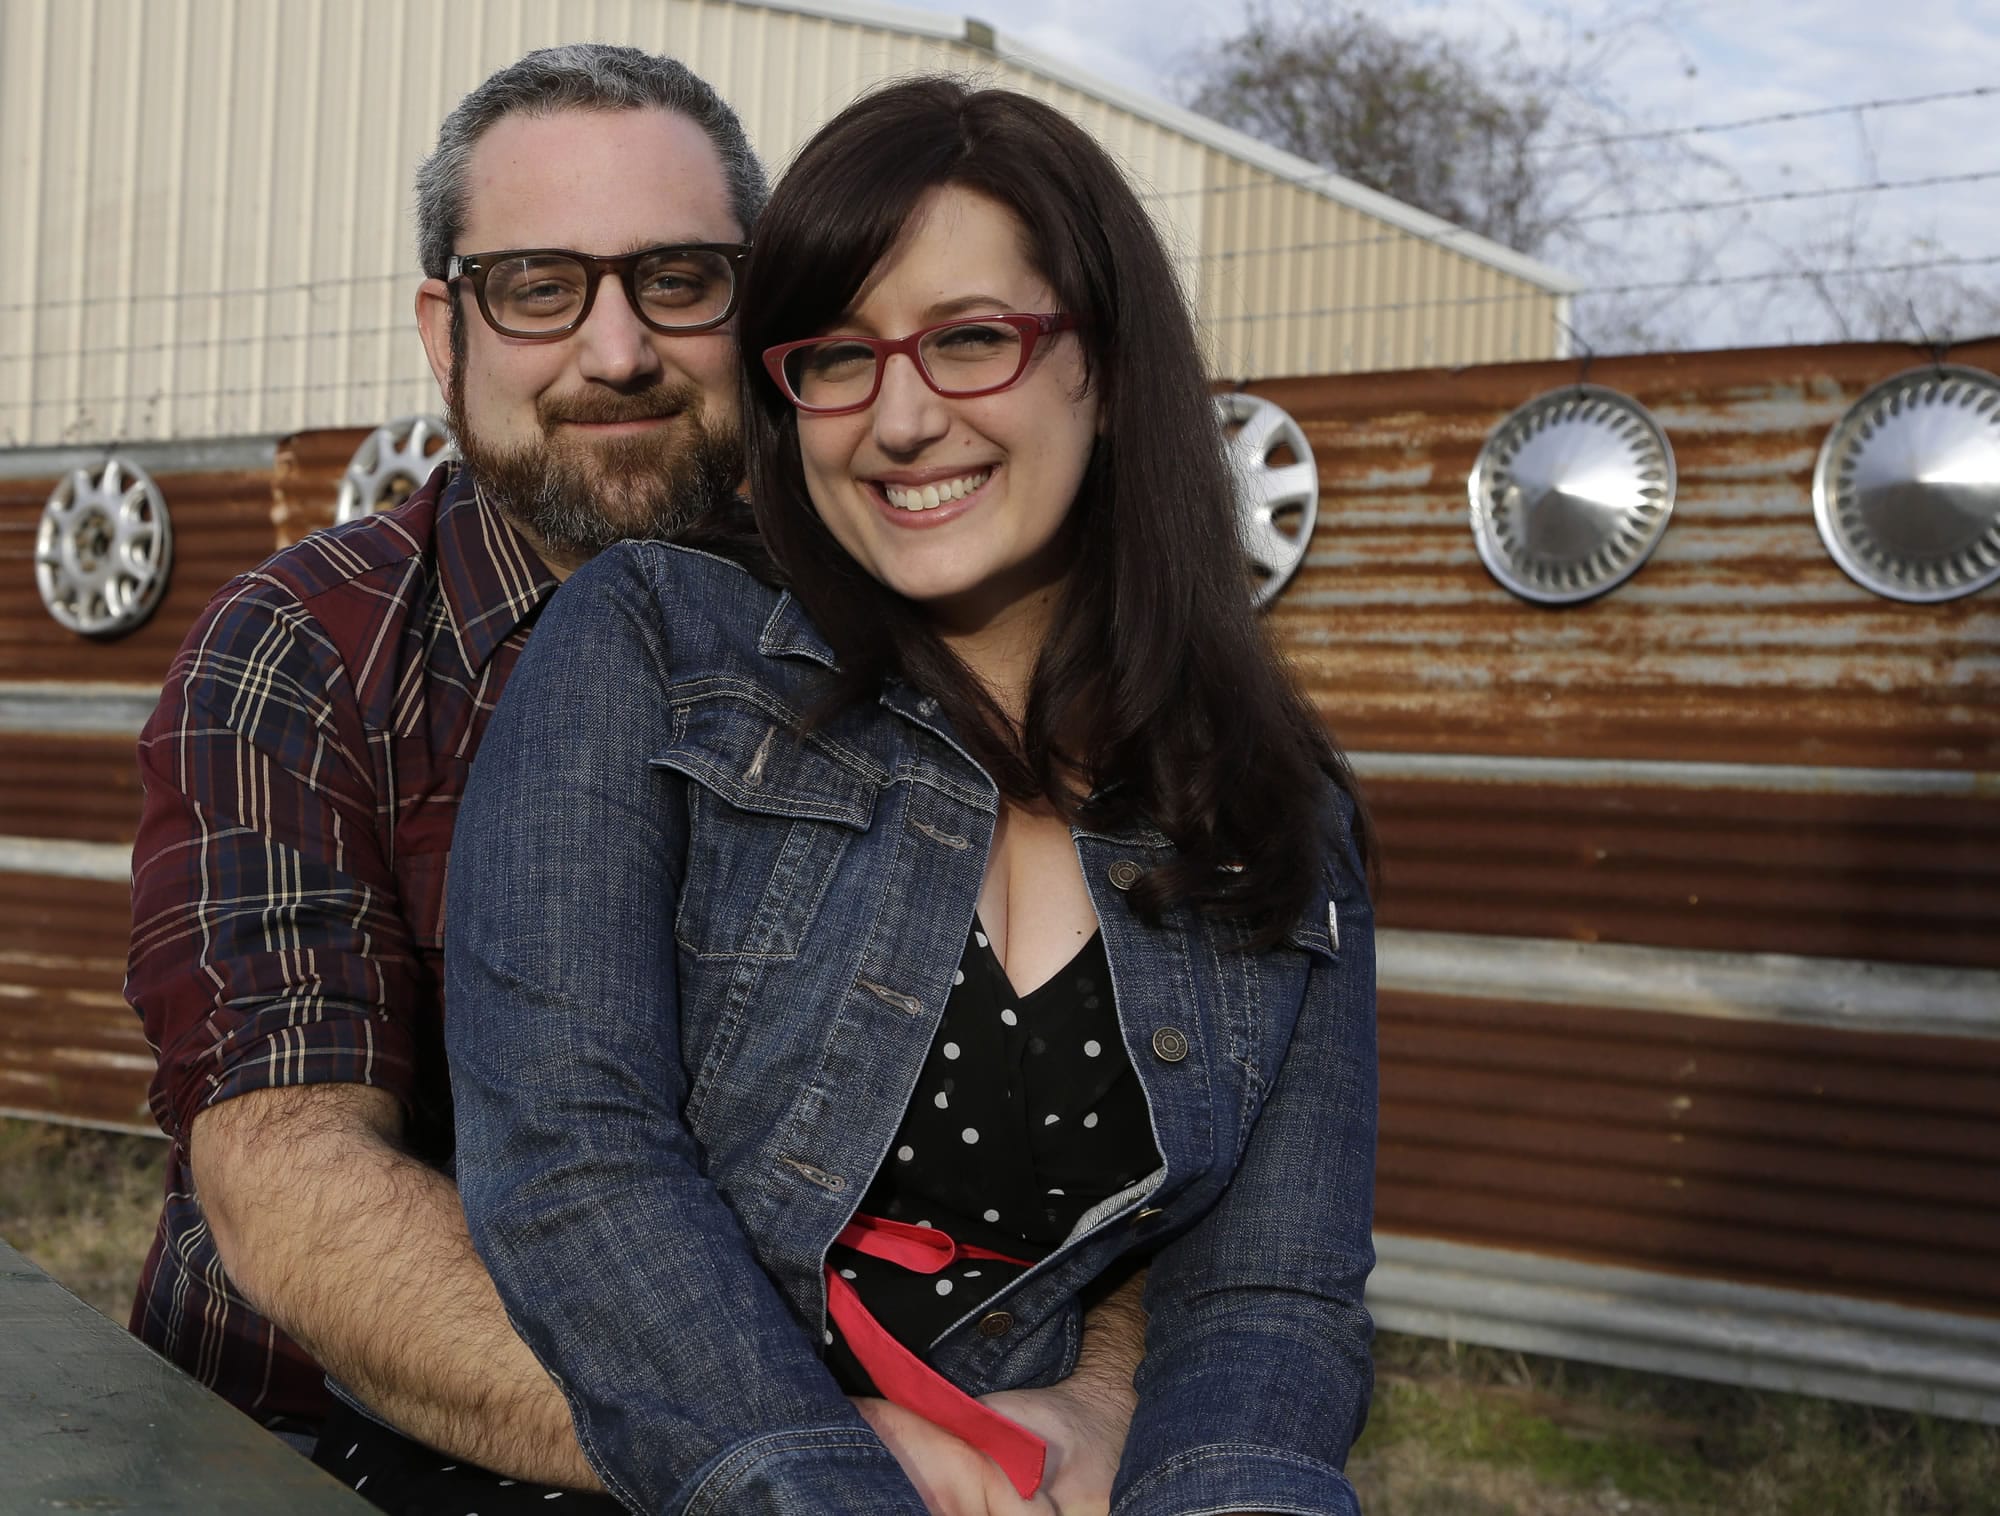 Brenden Macaluso and Nicole Buergers snuggle Jan. 19 at the eatery in Houston where they met nearly a year ago.